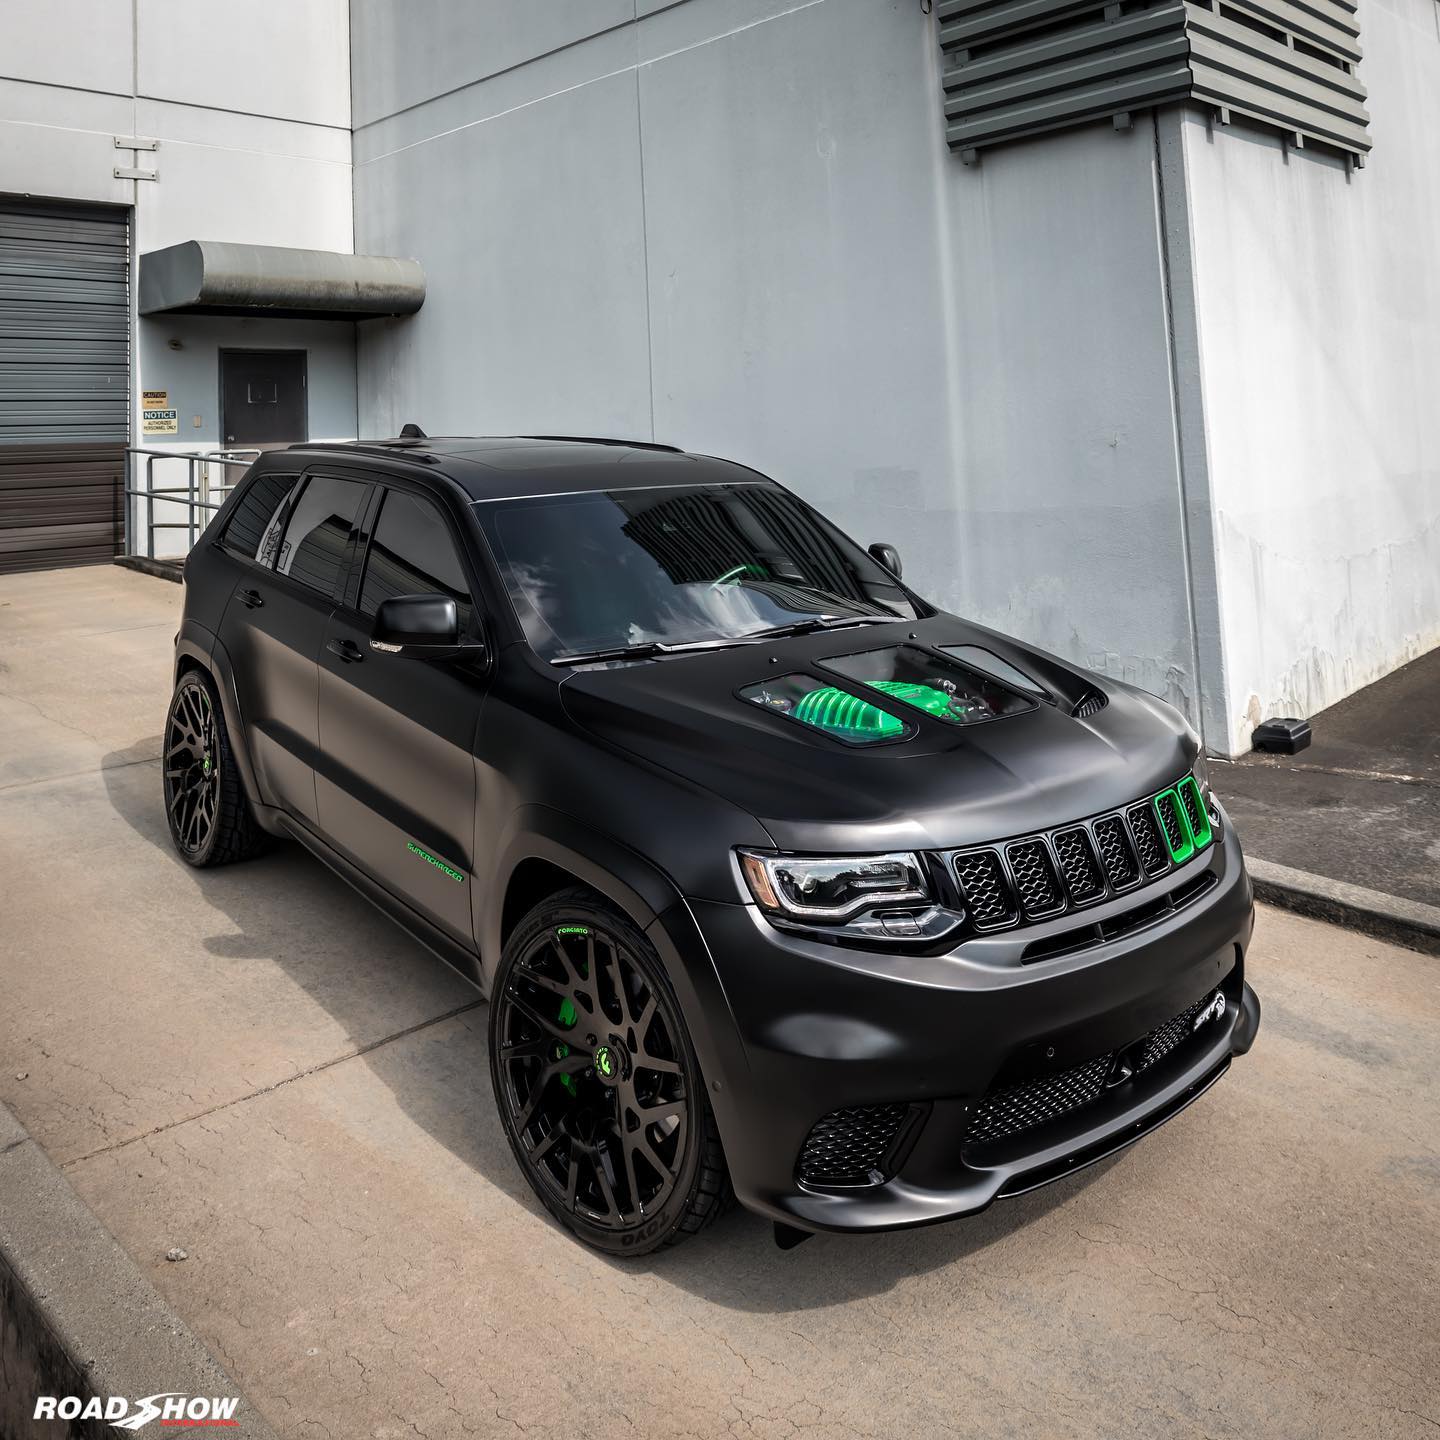 1,150HP Jeep Trackhawk Is Satin Black but Let’s SeeThrough, It's RS